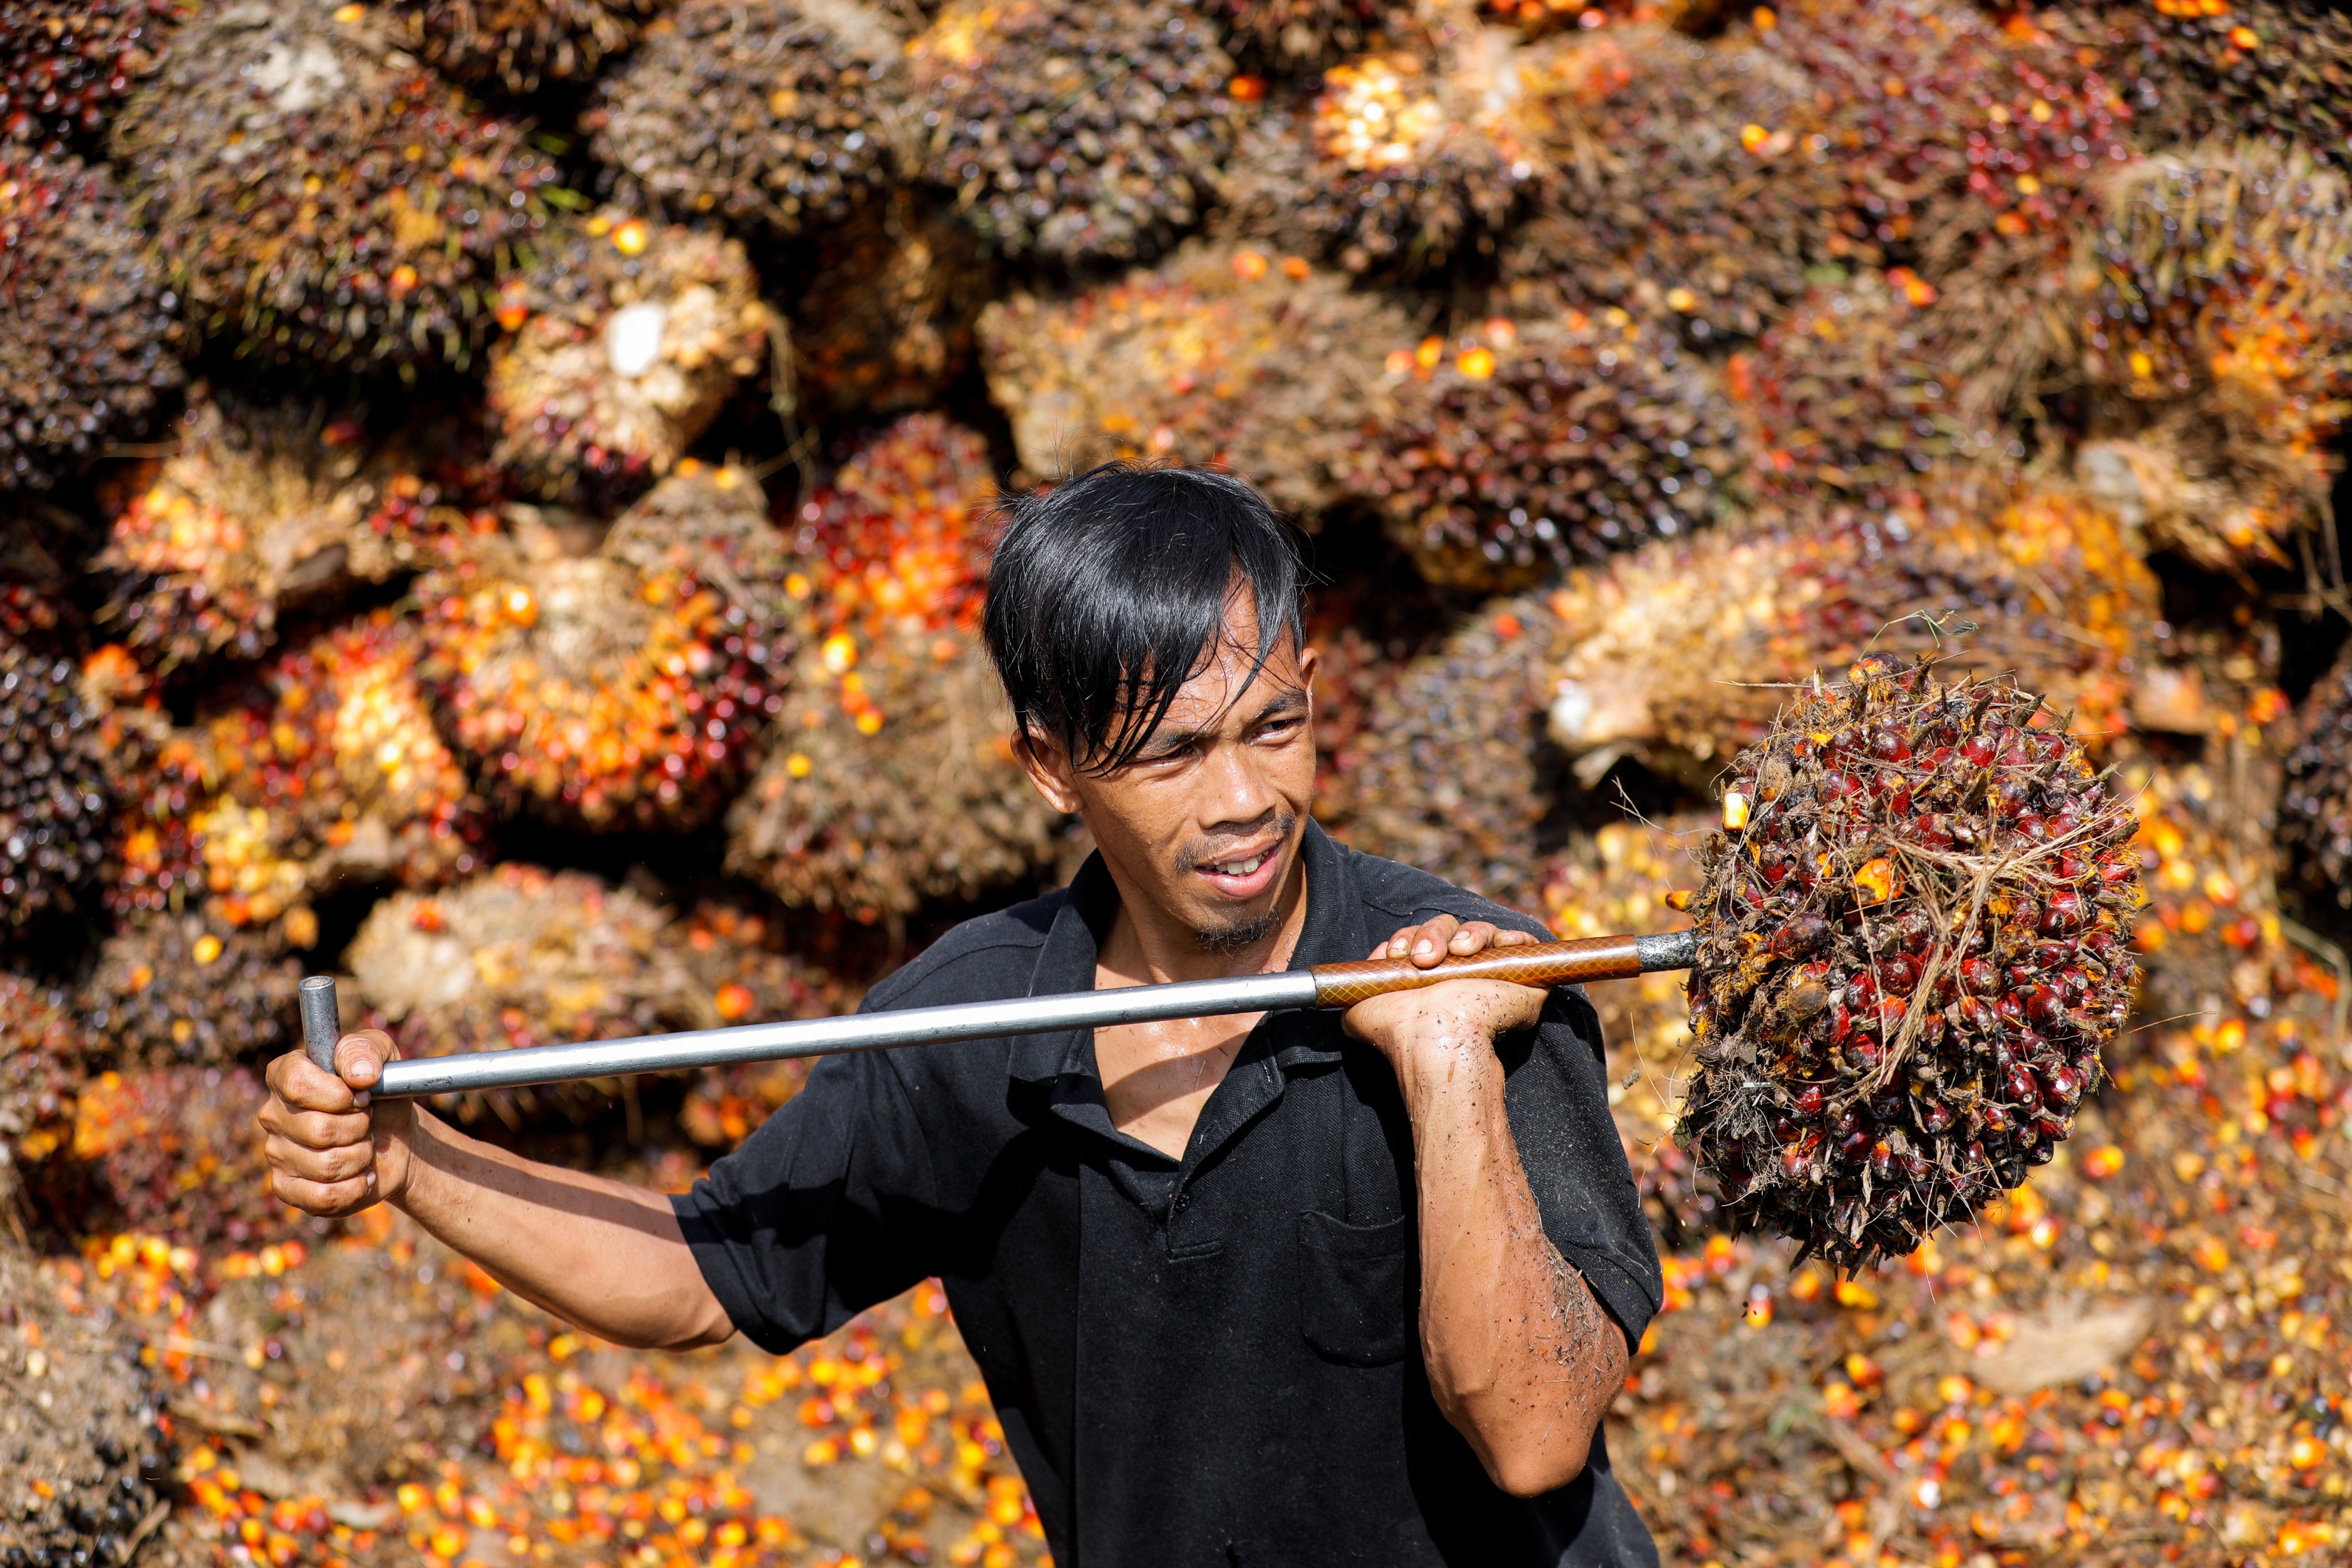 On April 27, 2022, a worker moves palm oil fresh fruit bunches that will be transported from the collector site to factories in Pekanbaru, Indonesia. Photo: Reuters